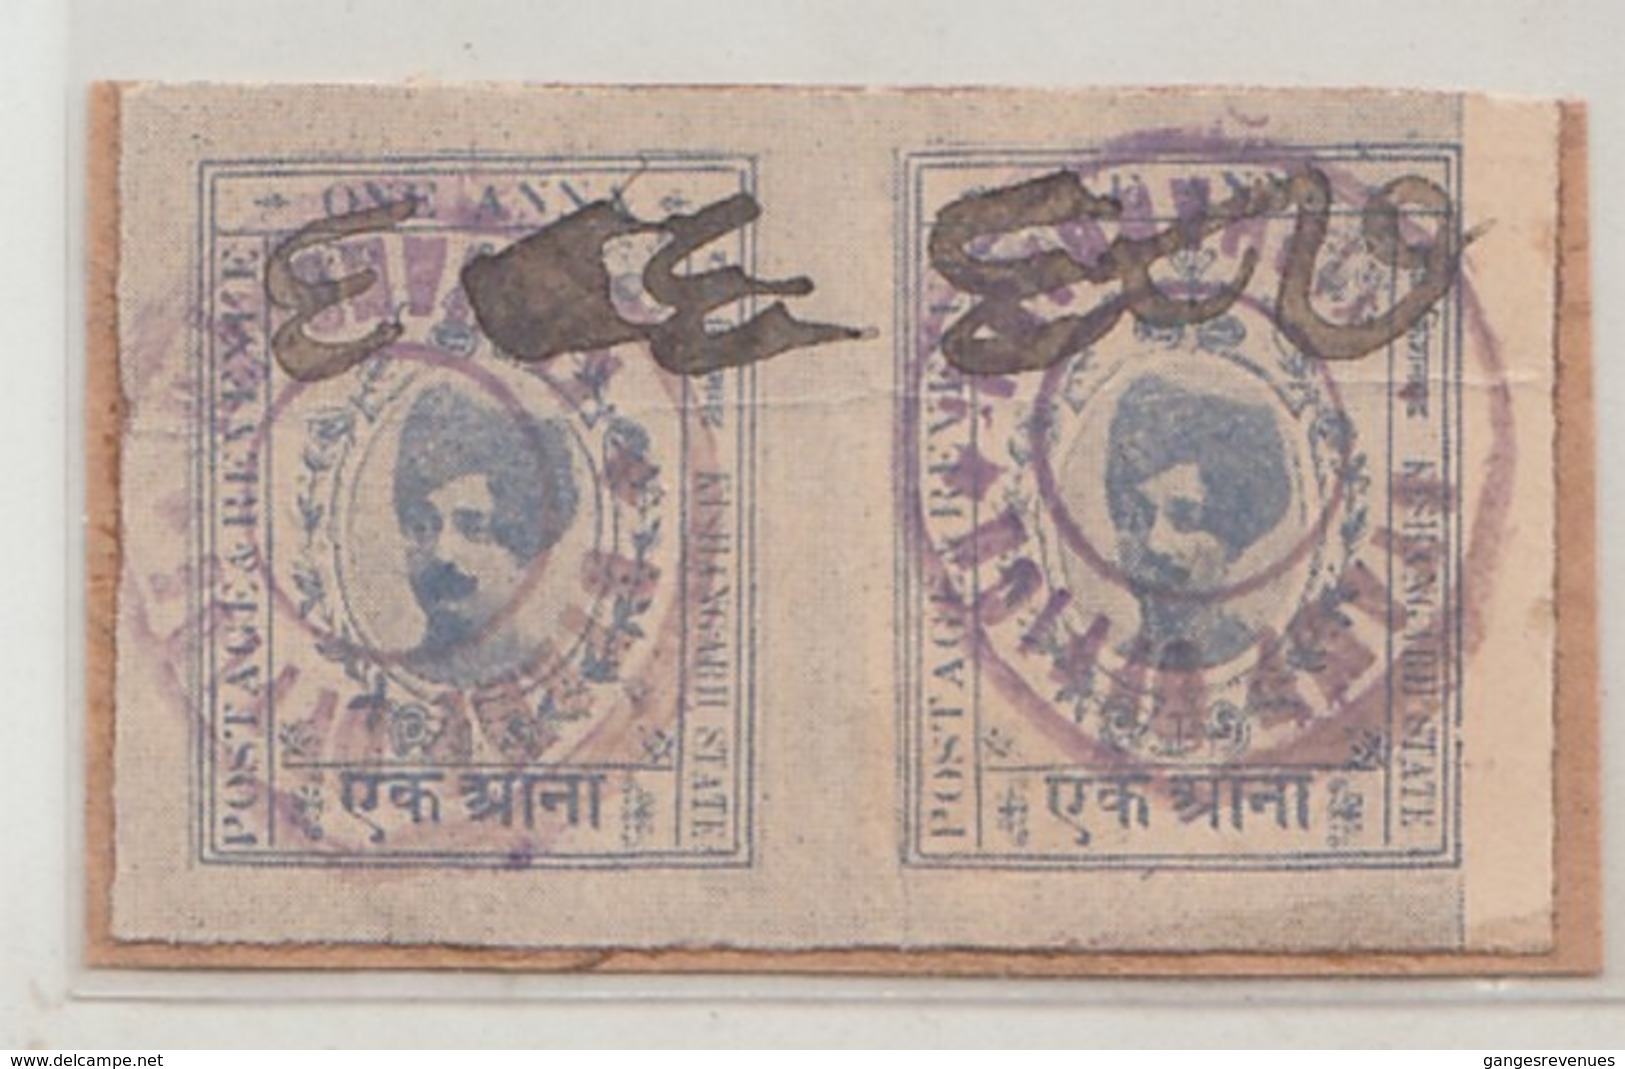 KISHANGARH State  1A  Imperf  Revenue  Pair  Type 25  # 94350  Inde Indien   Fiscaux Fiscal Revenue India - Kishengarh